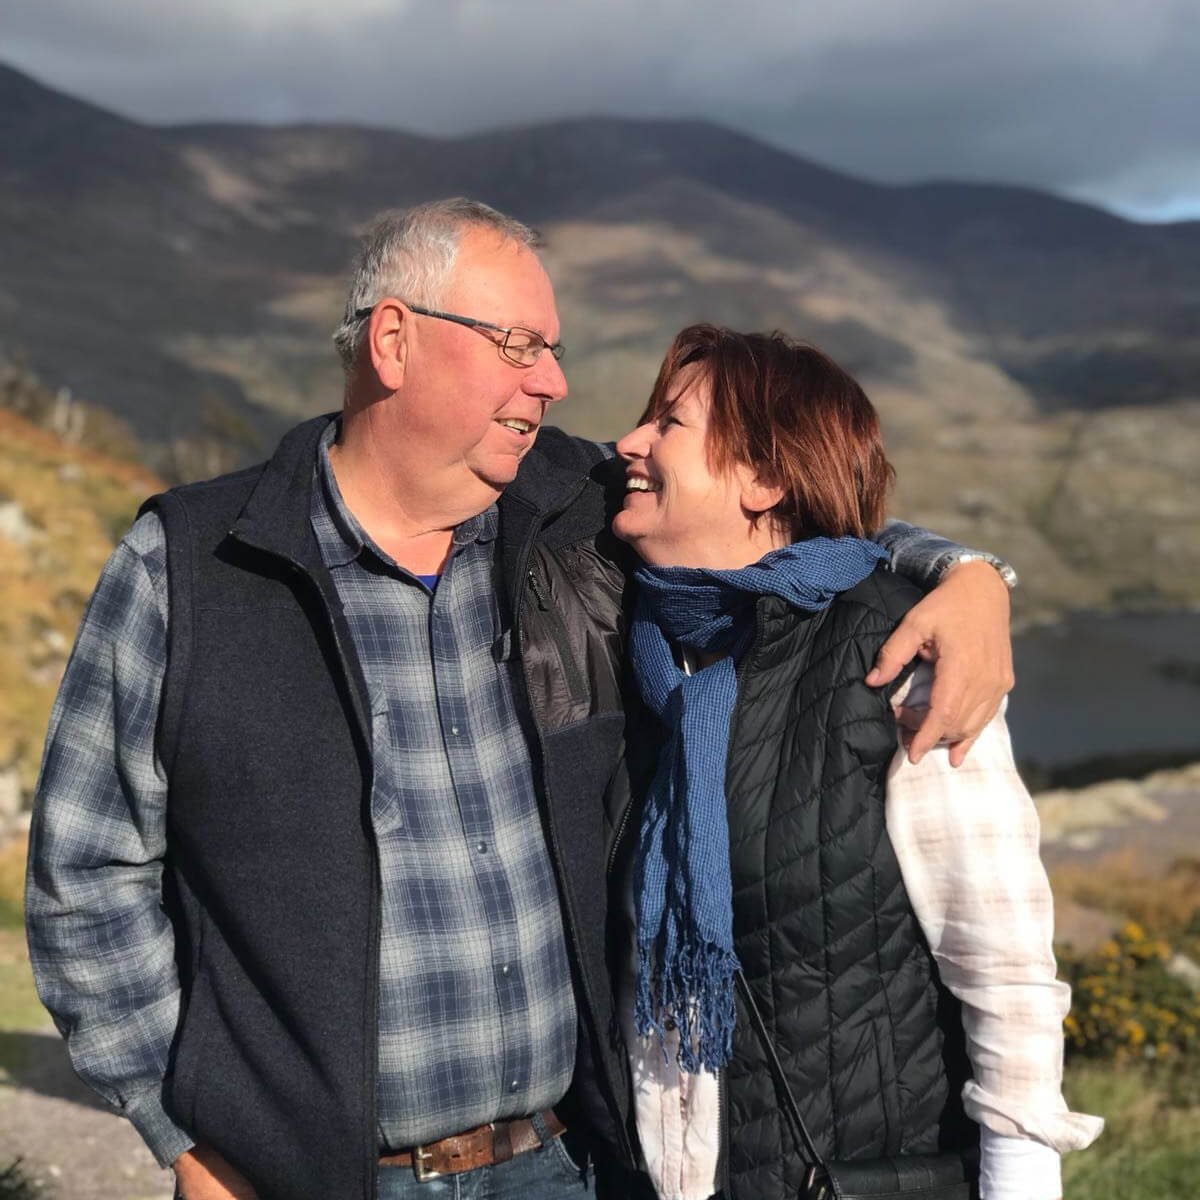 Middle aged couple look into each other's eyes in a scenic location in Ireland